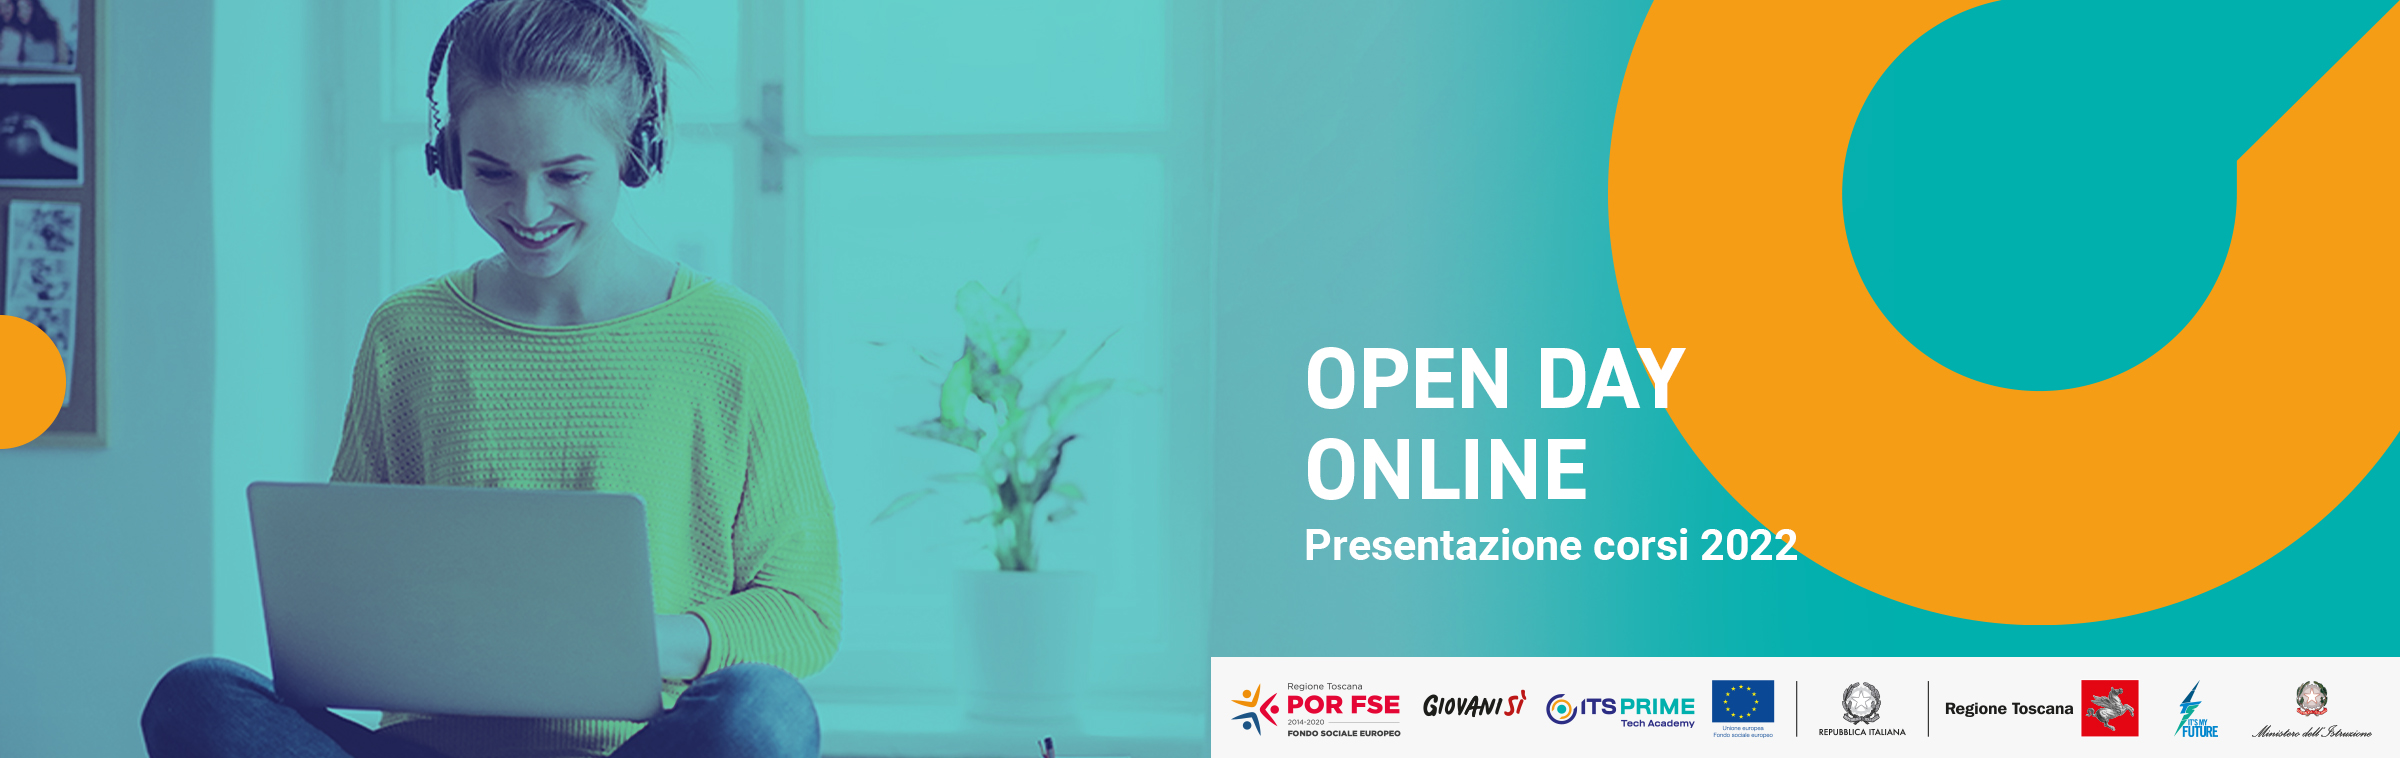 ITS-openday-online-generico